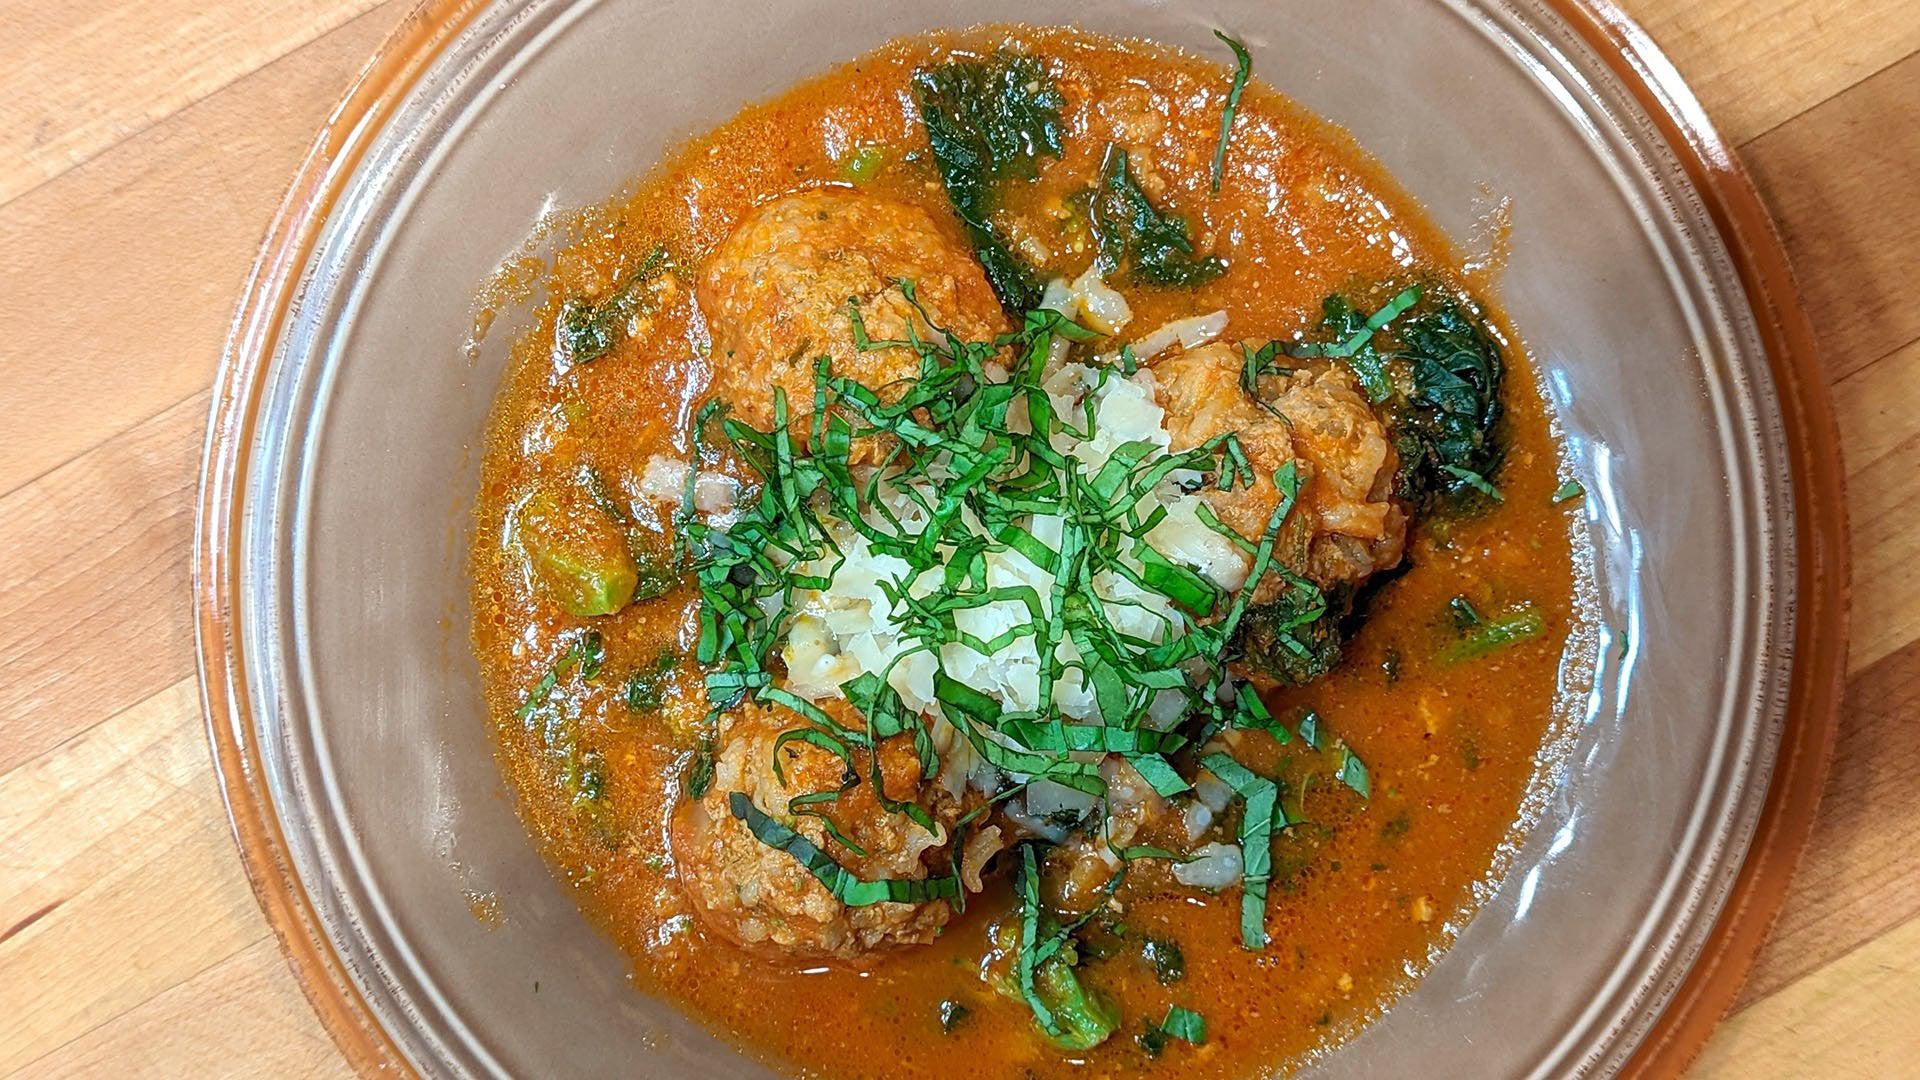 Porcupine Meatballs in Tomato Soup with Broccoli Rabe or Broccolini